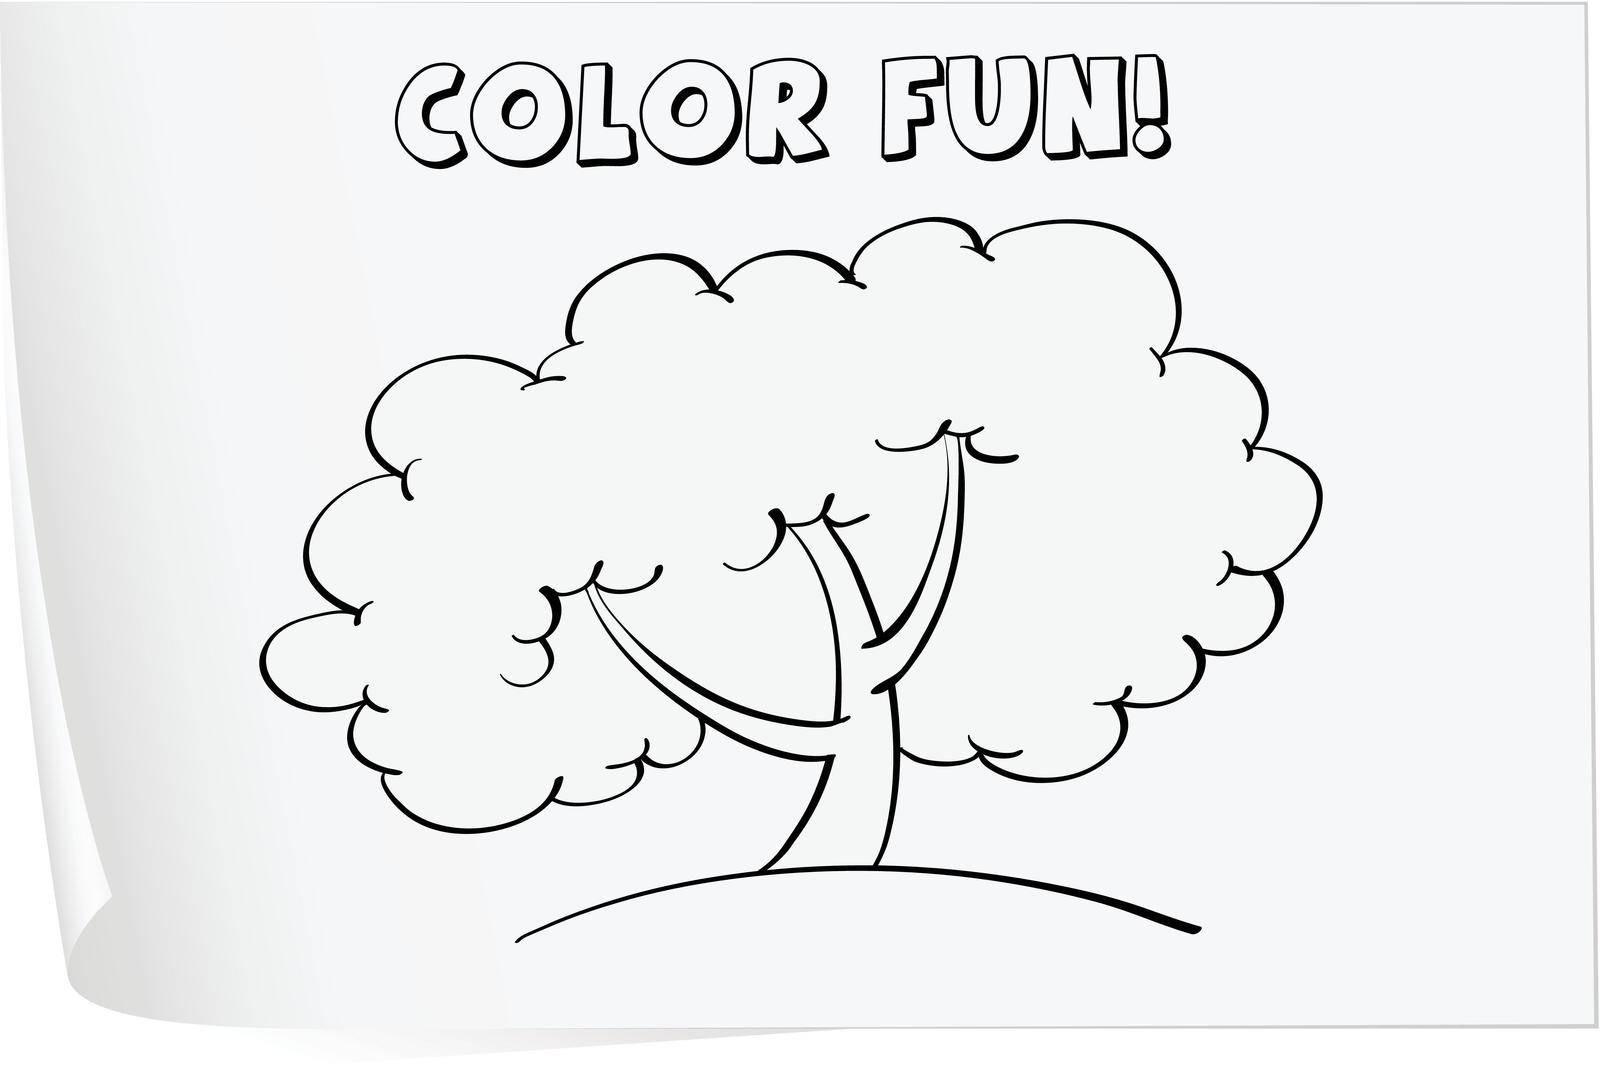 Illustration of a colouring worksheet (tree)